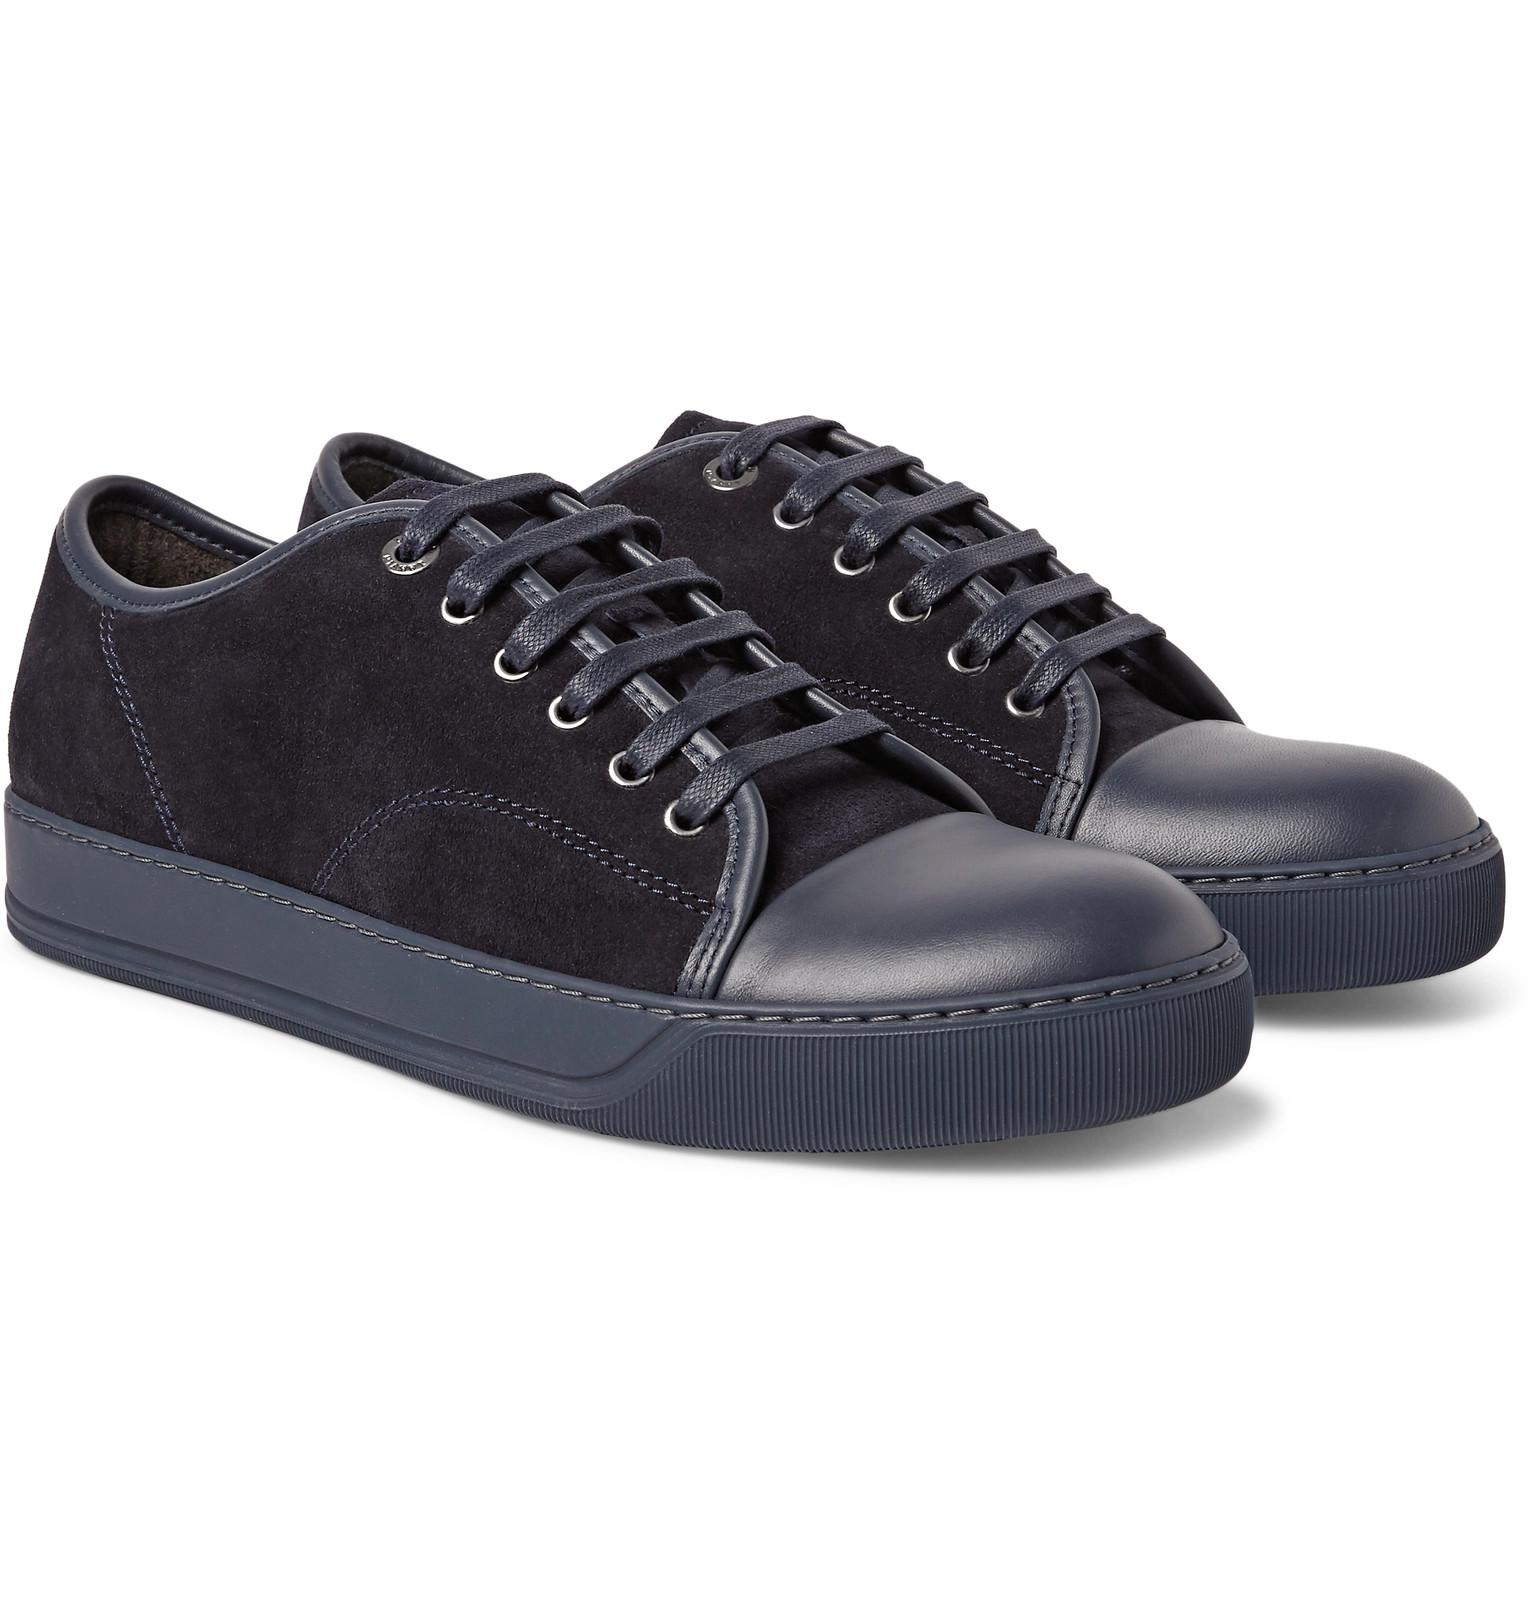 Lyst - Lanvin Cap-toe Suede And Leather Sneakers in Blue for Men